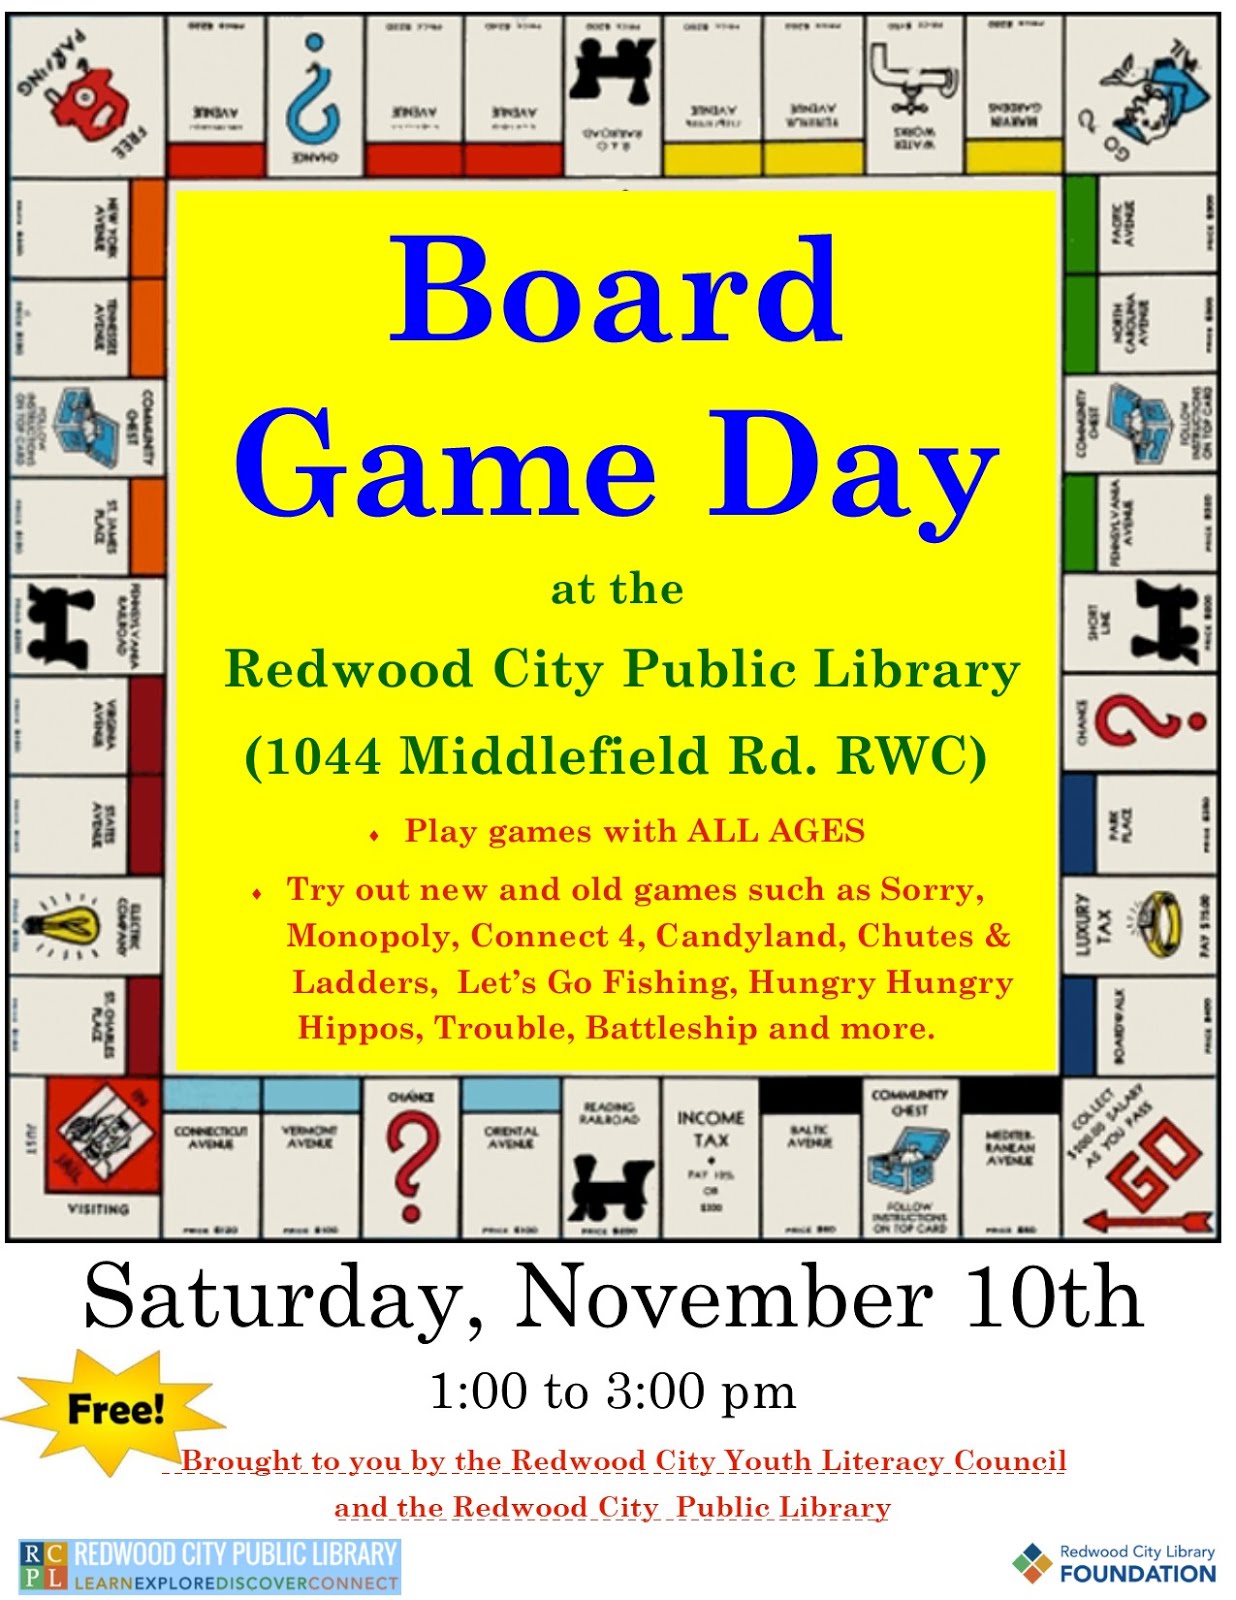 Free Family Board Game Day at the Library this Saturday